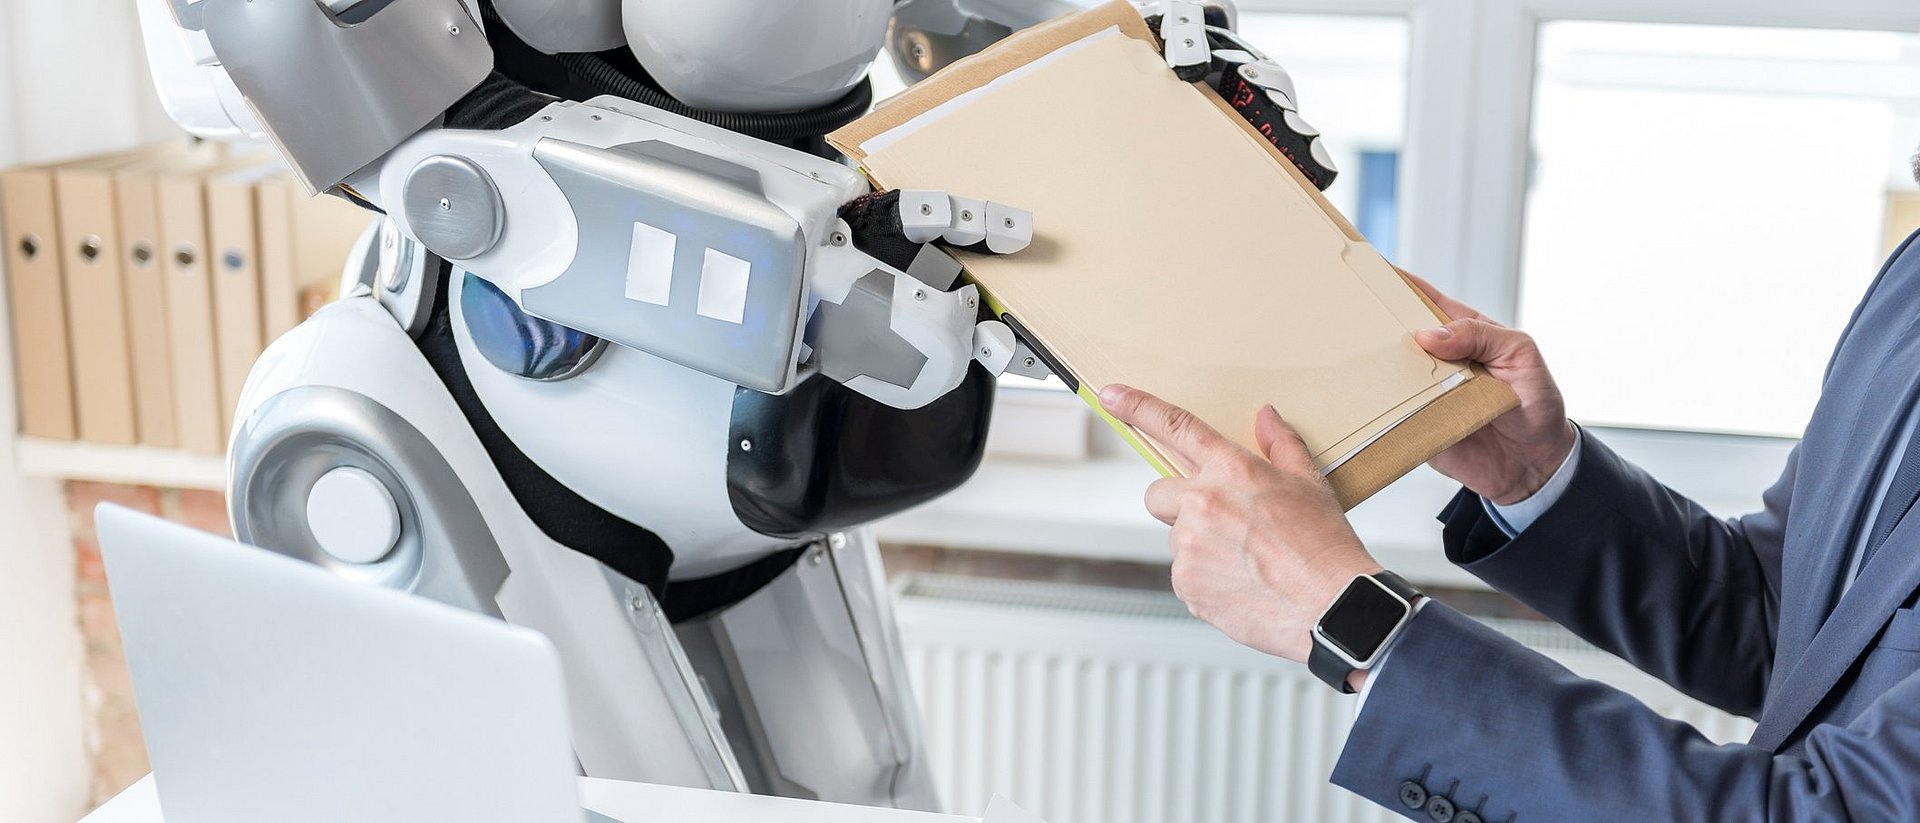 A man hands documents to a robot.